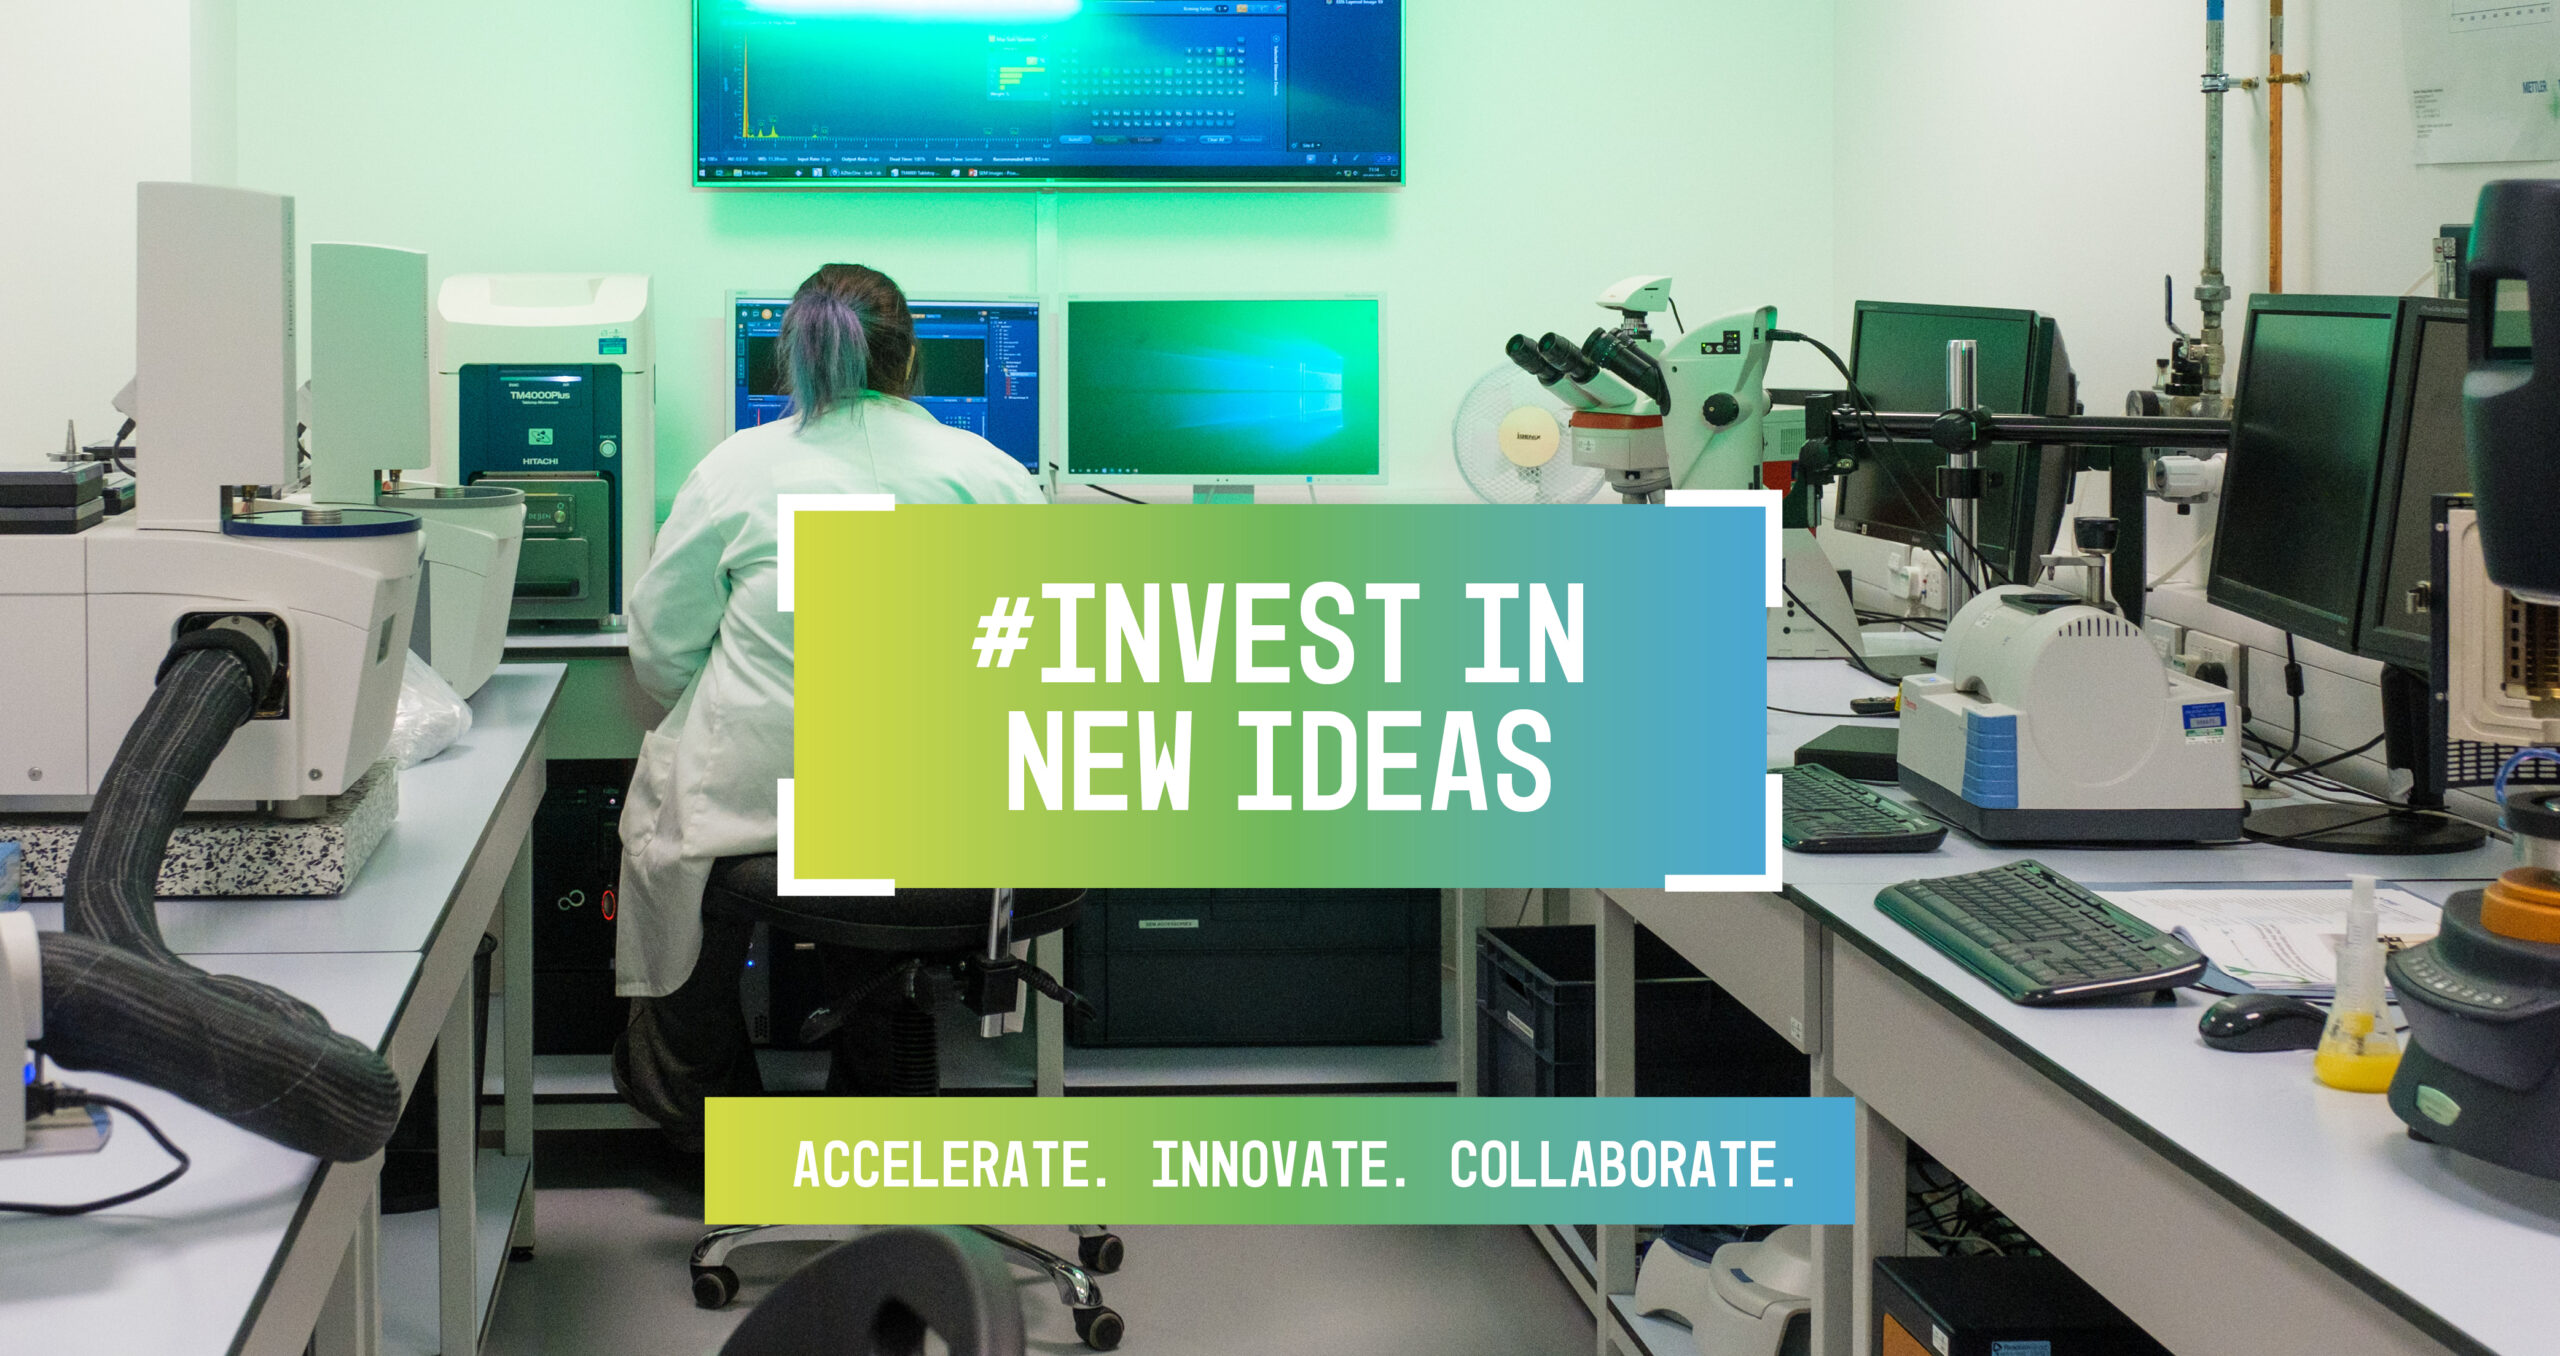 #Invest in new ideas